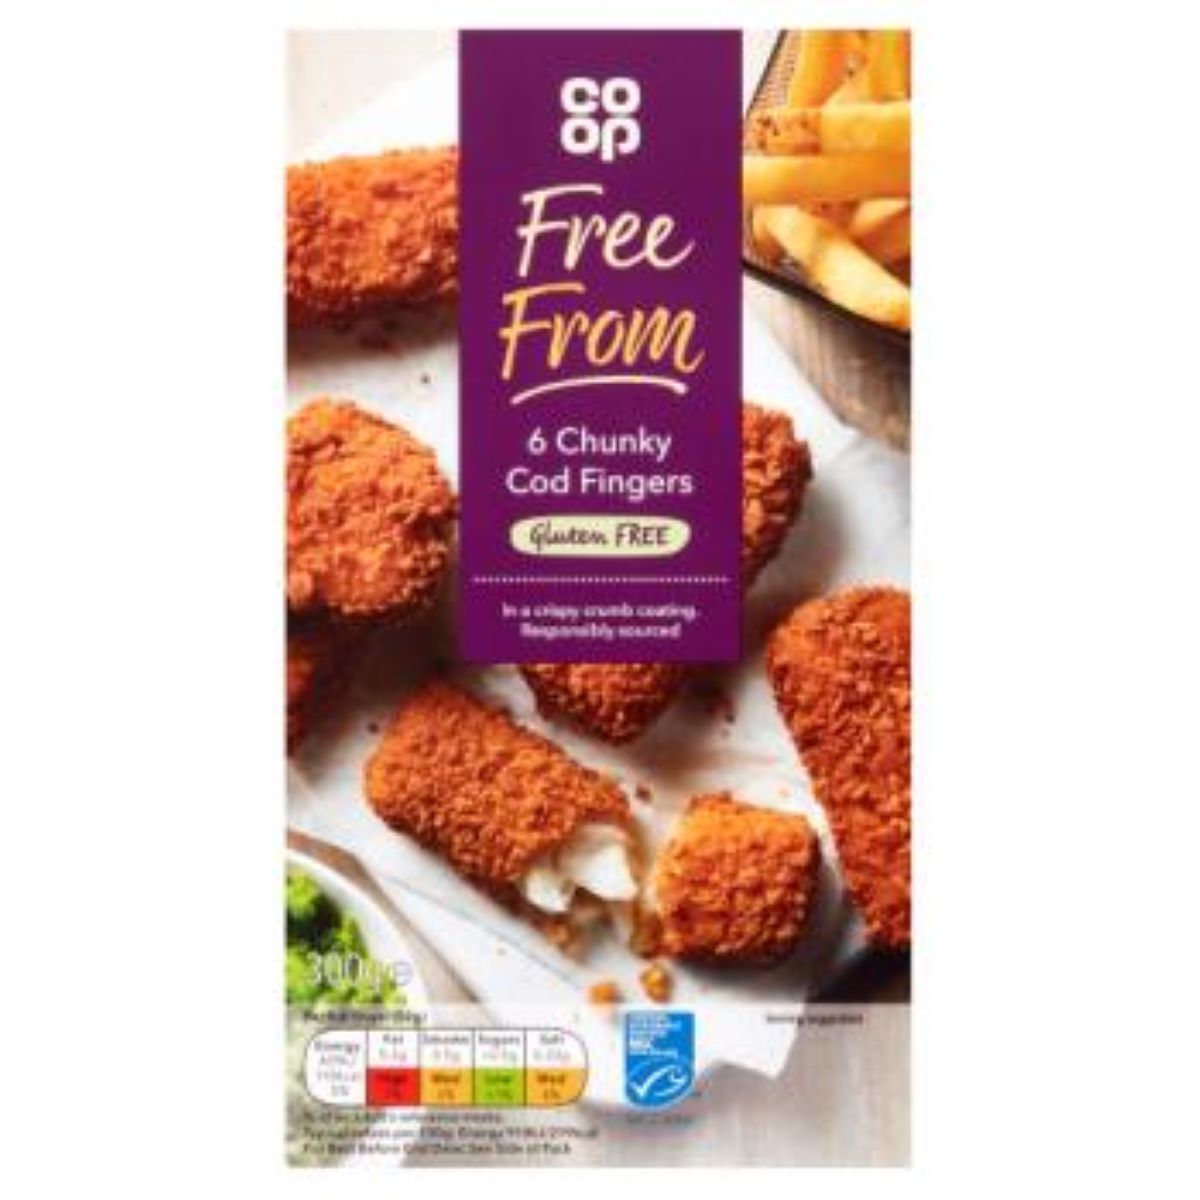 Co-op Free From 6 Chunky Cod Fingers 300g